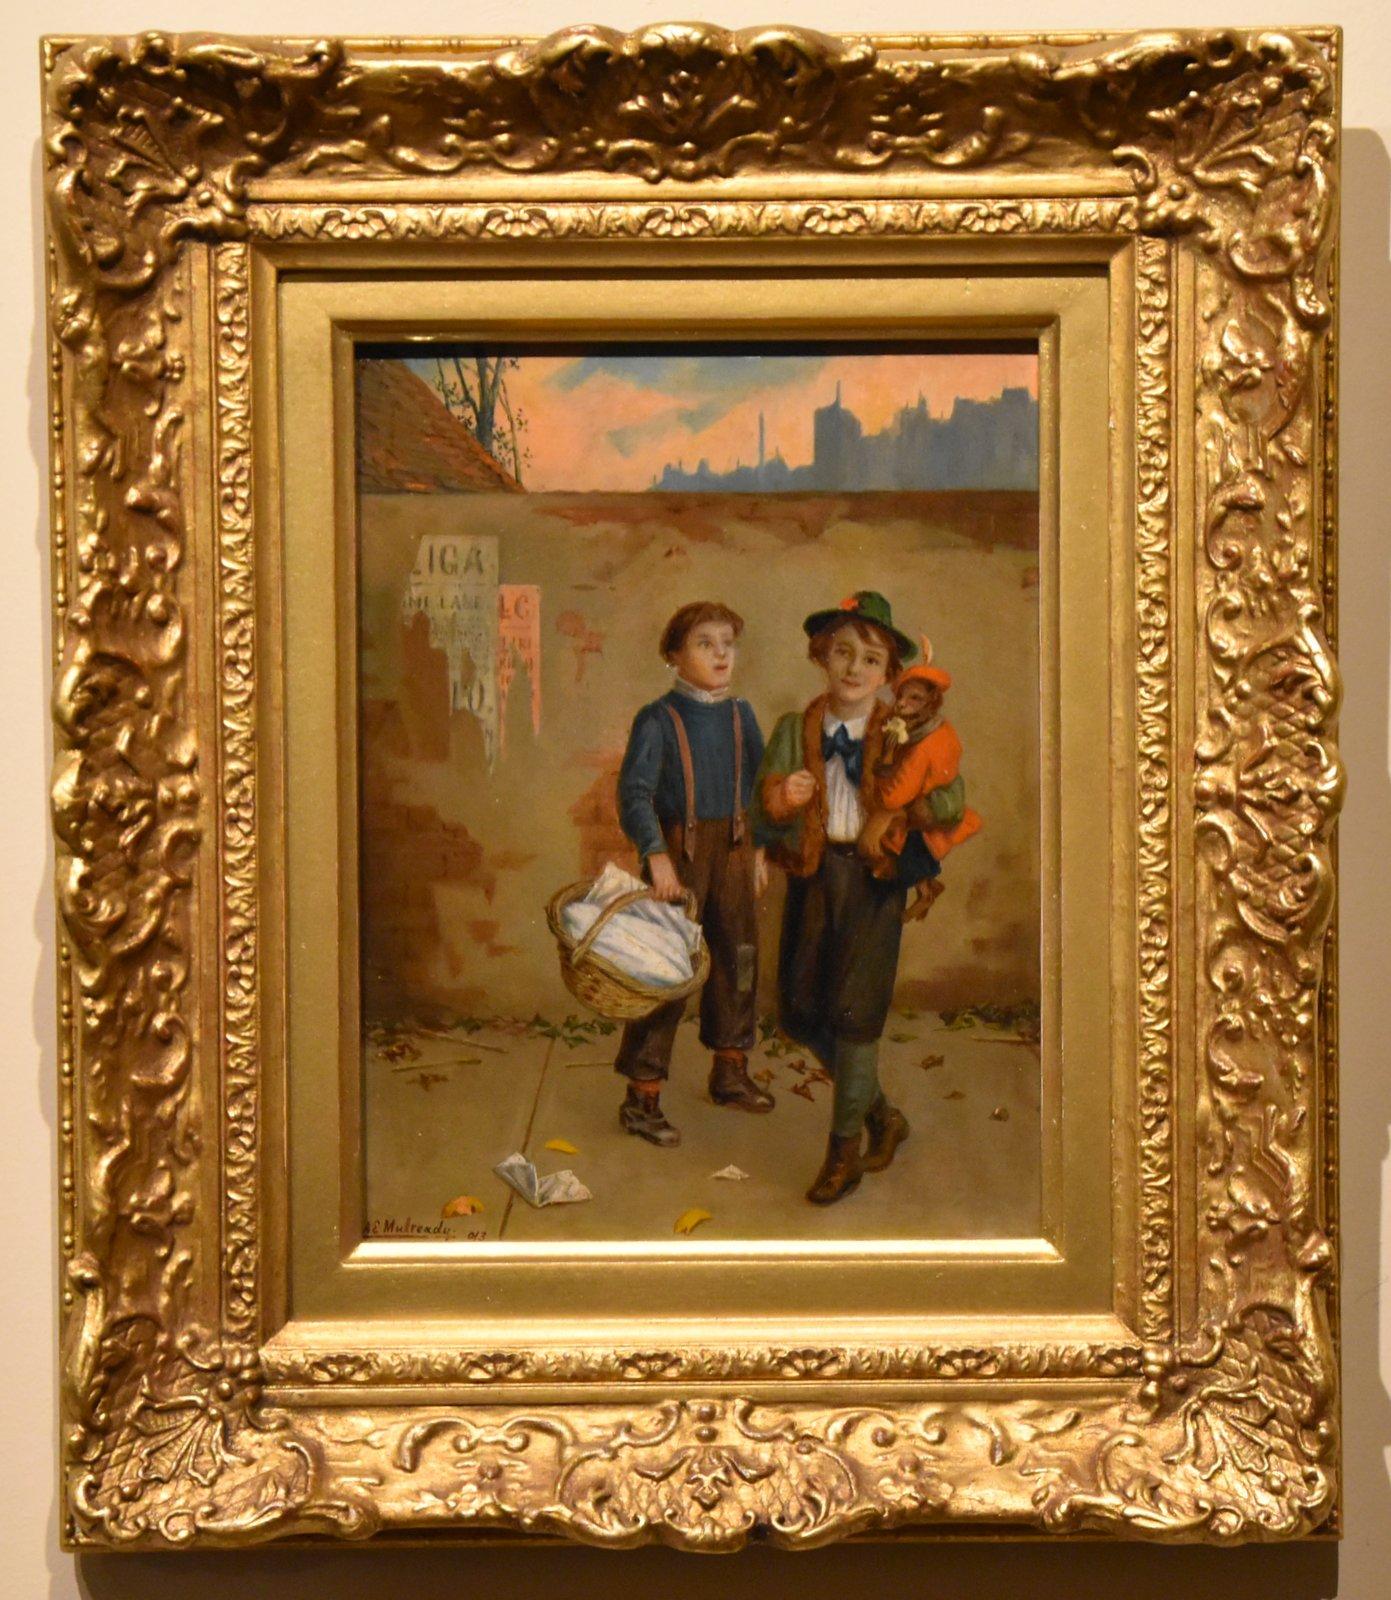 Oil Painting by Augustus Mulready "Visitors to London" 1844 - 1905
Member of the Cranbrook colony painting figurative street scenes, regular exhibito royal Academy. Oil on board. Signed dated 1903

Dimensions unframed 9 x 7 inches
Dimensions framed